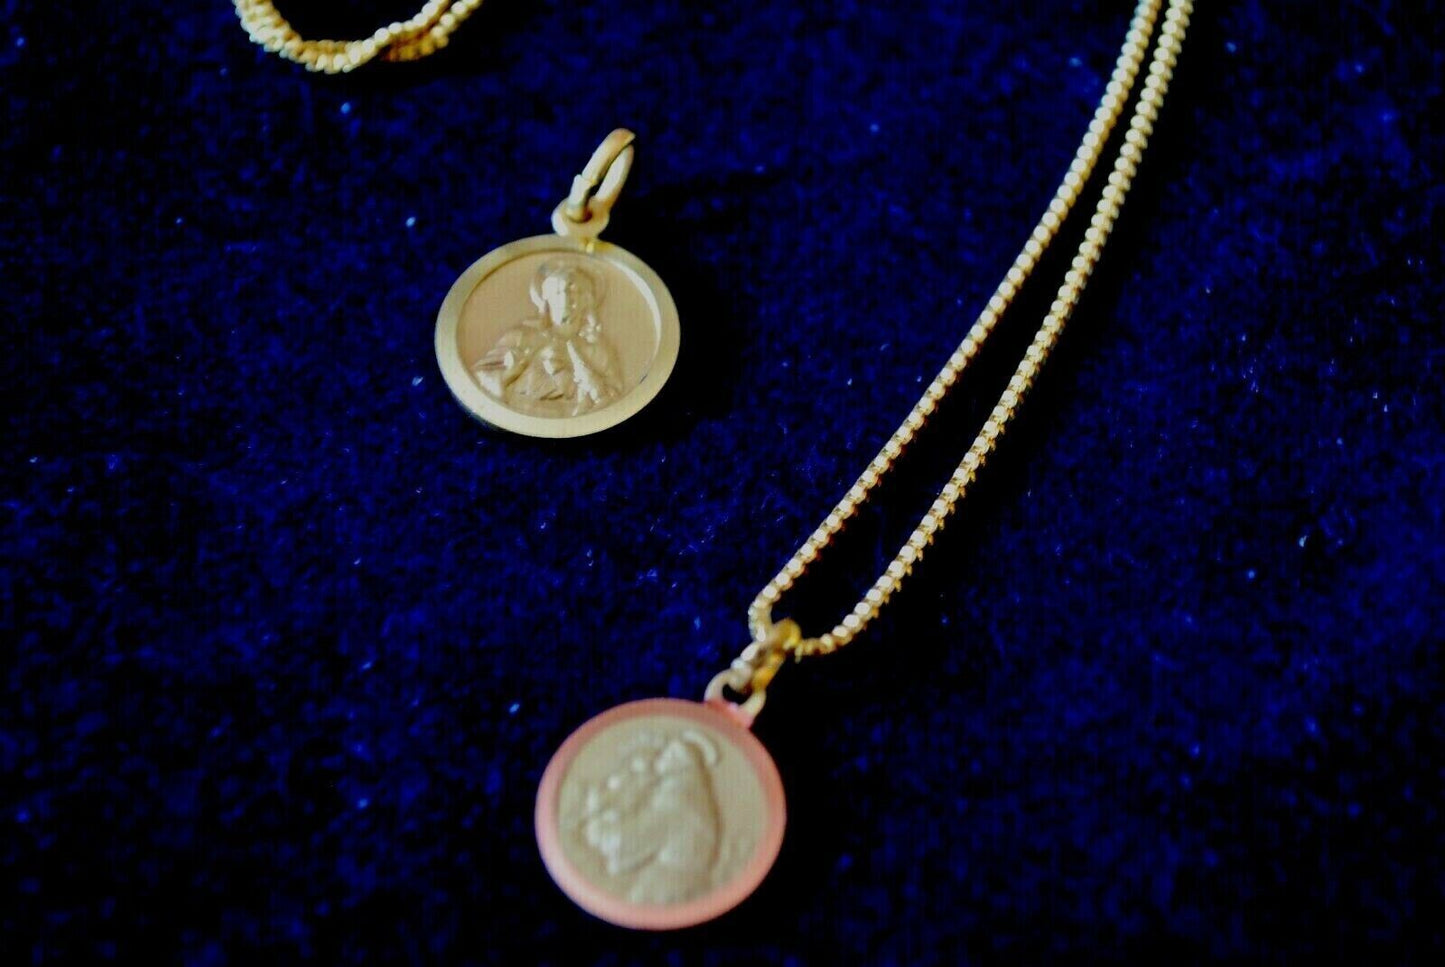 Vintage necklace - medals of Saint Anthony and the Sacred Heart of Jesus